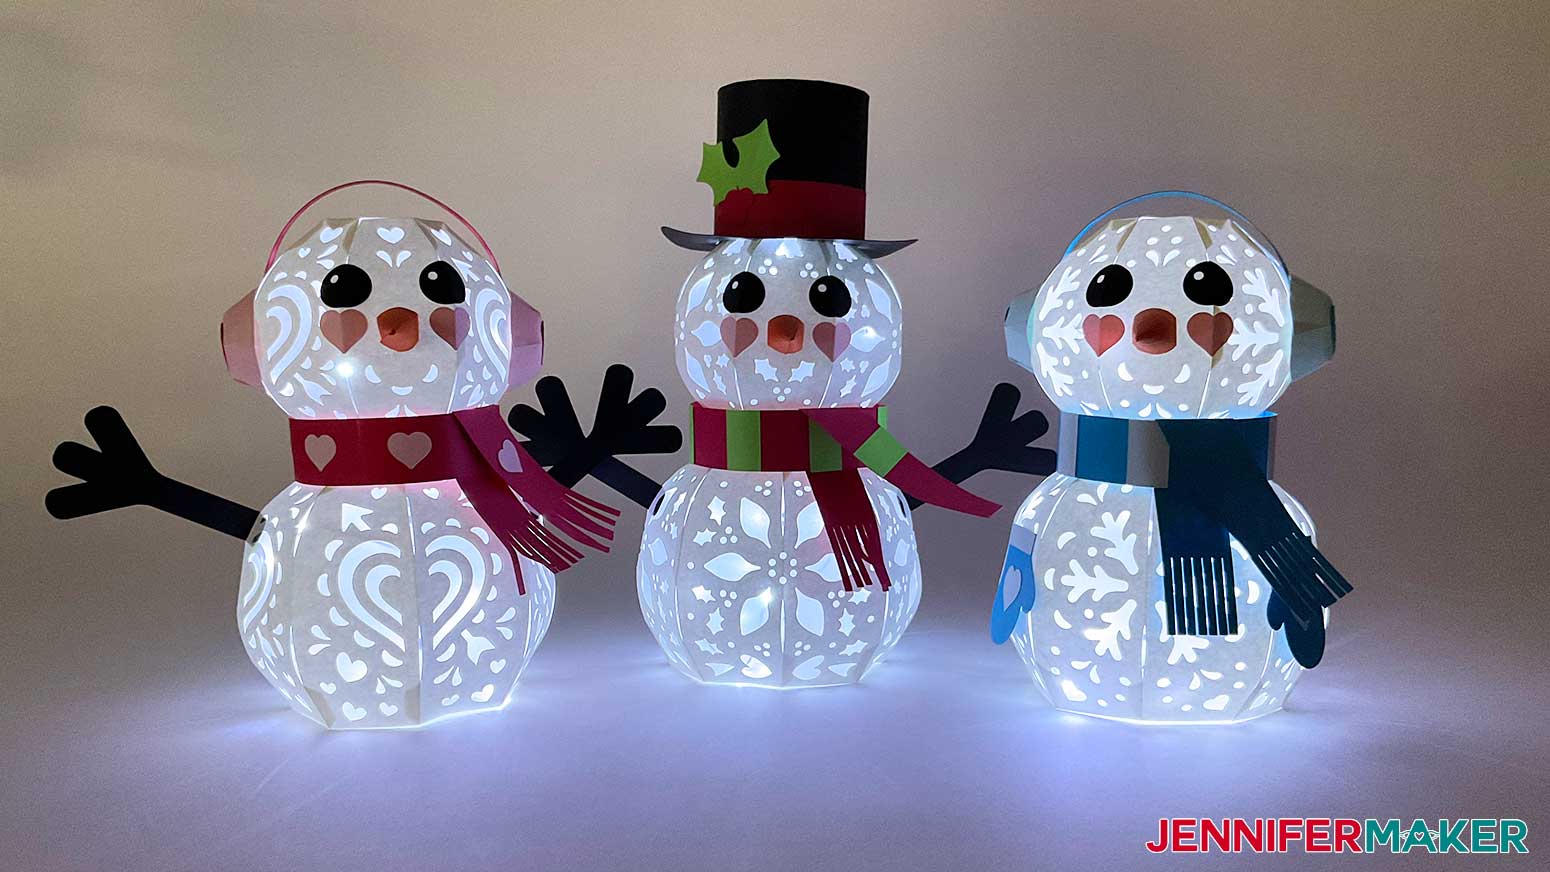 Assembled Valentine's Day, Christmas, and Winter light up paper snowmen placed side by side with lights illuminating them from the inside